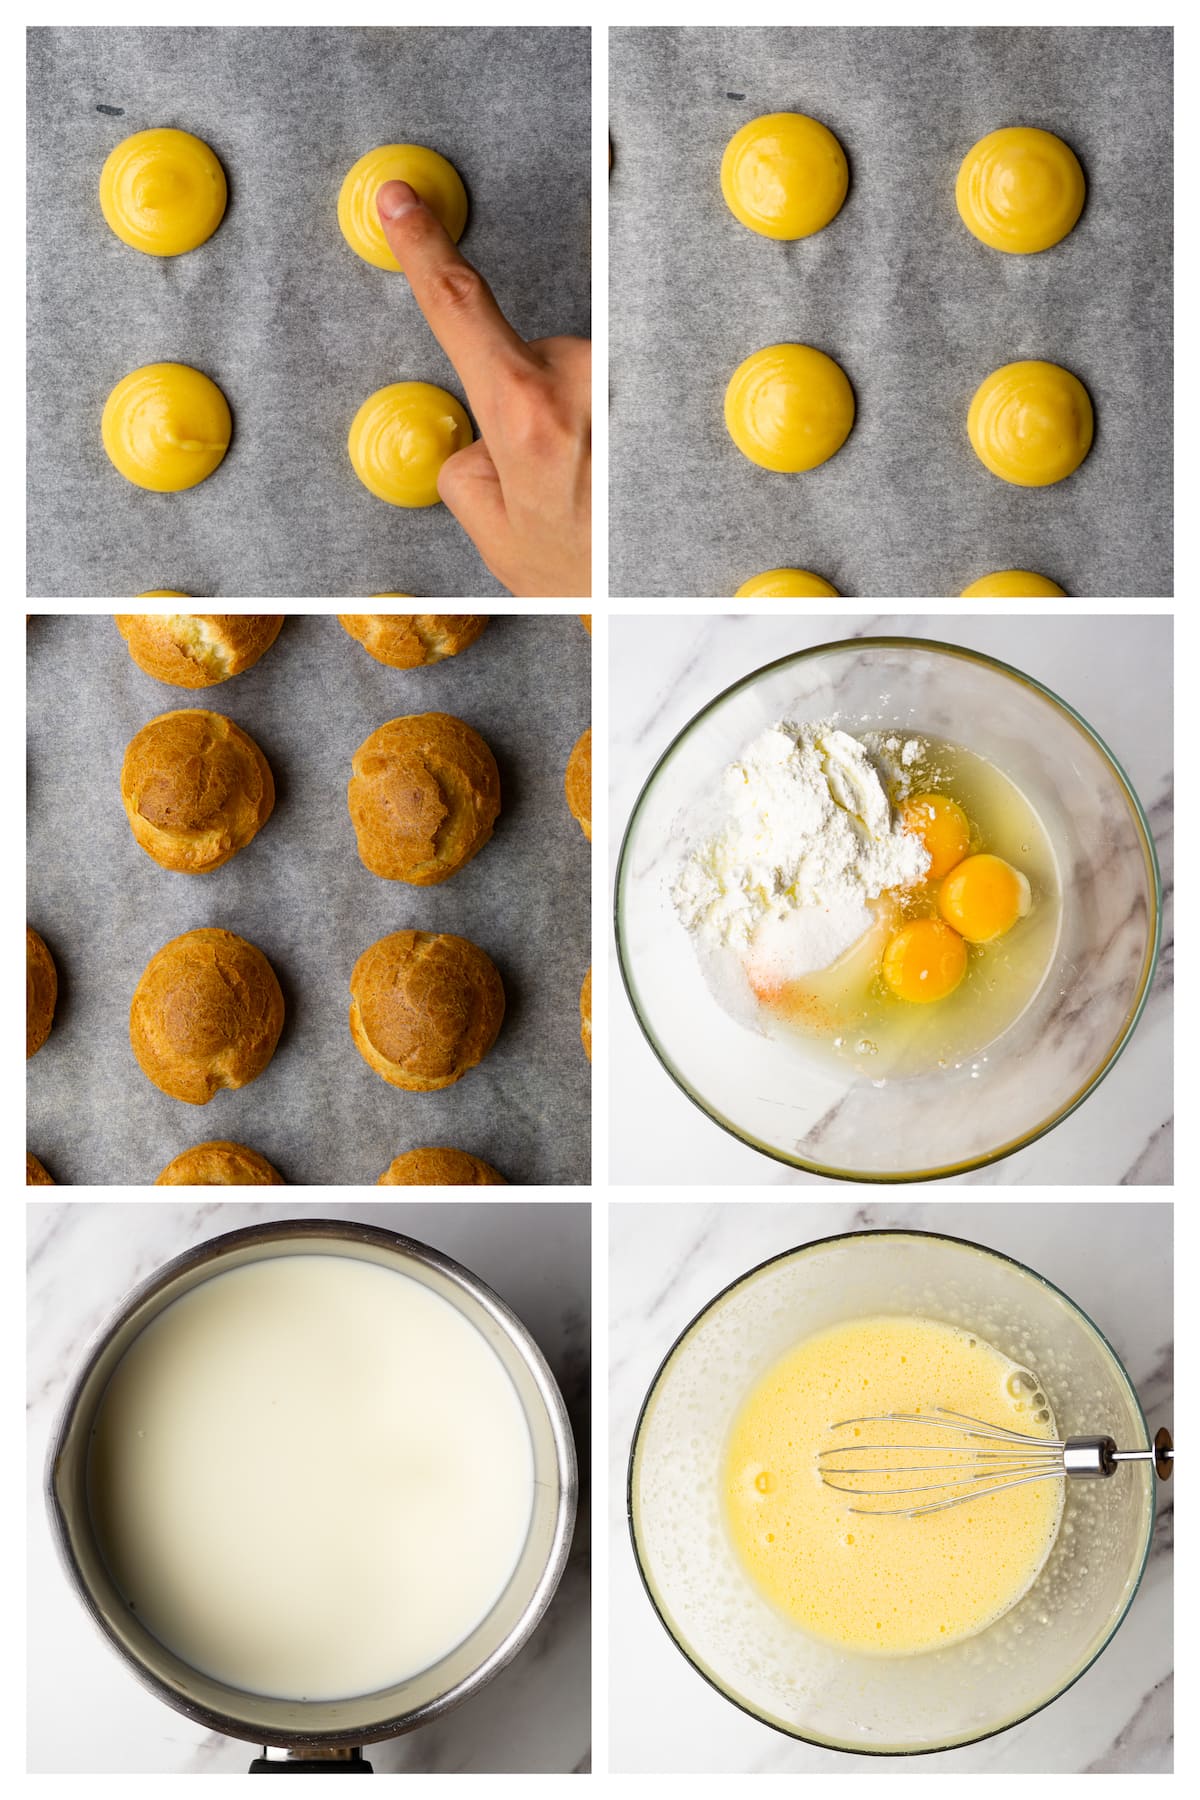 Collage image showing six steps to bake profiteroles and make pastry cream filling for them.